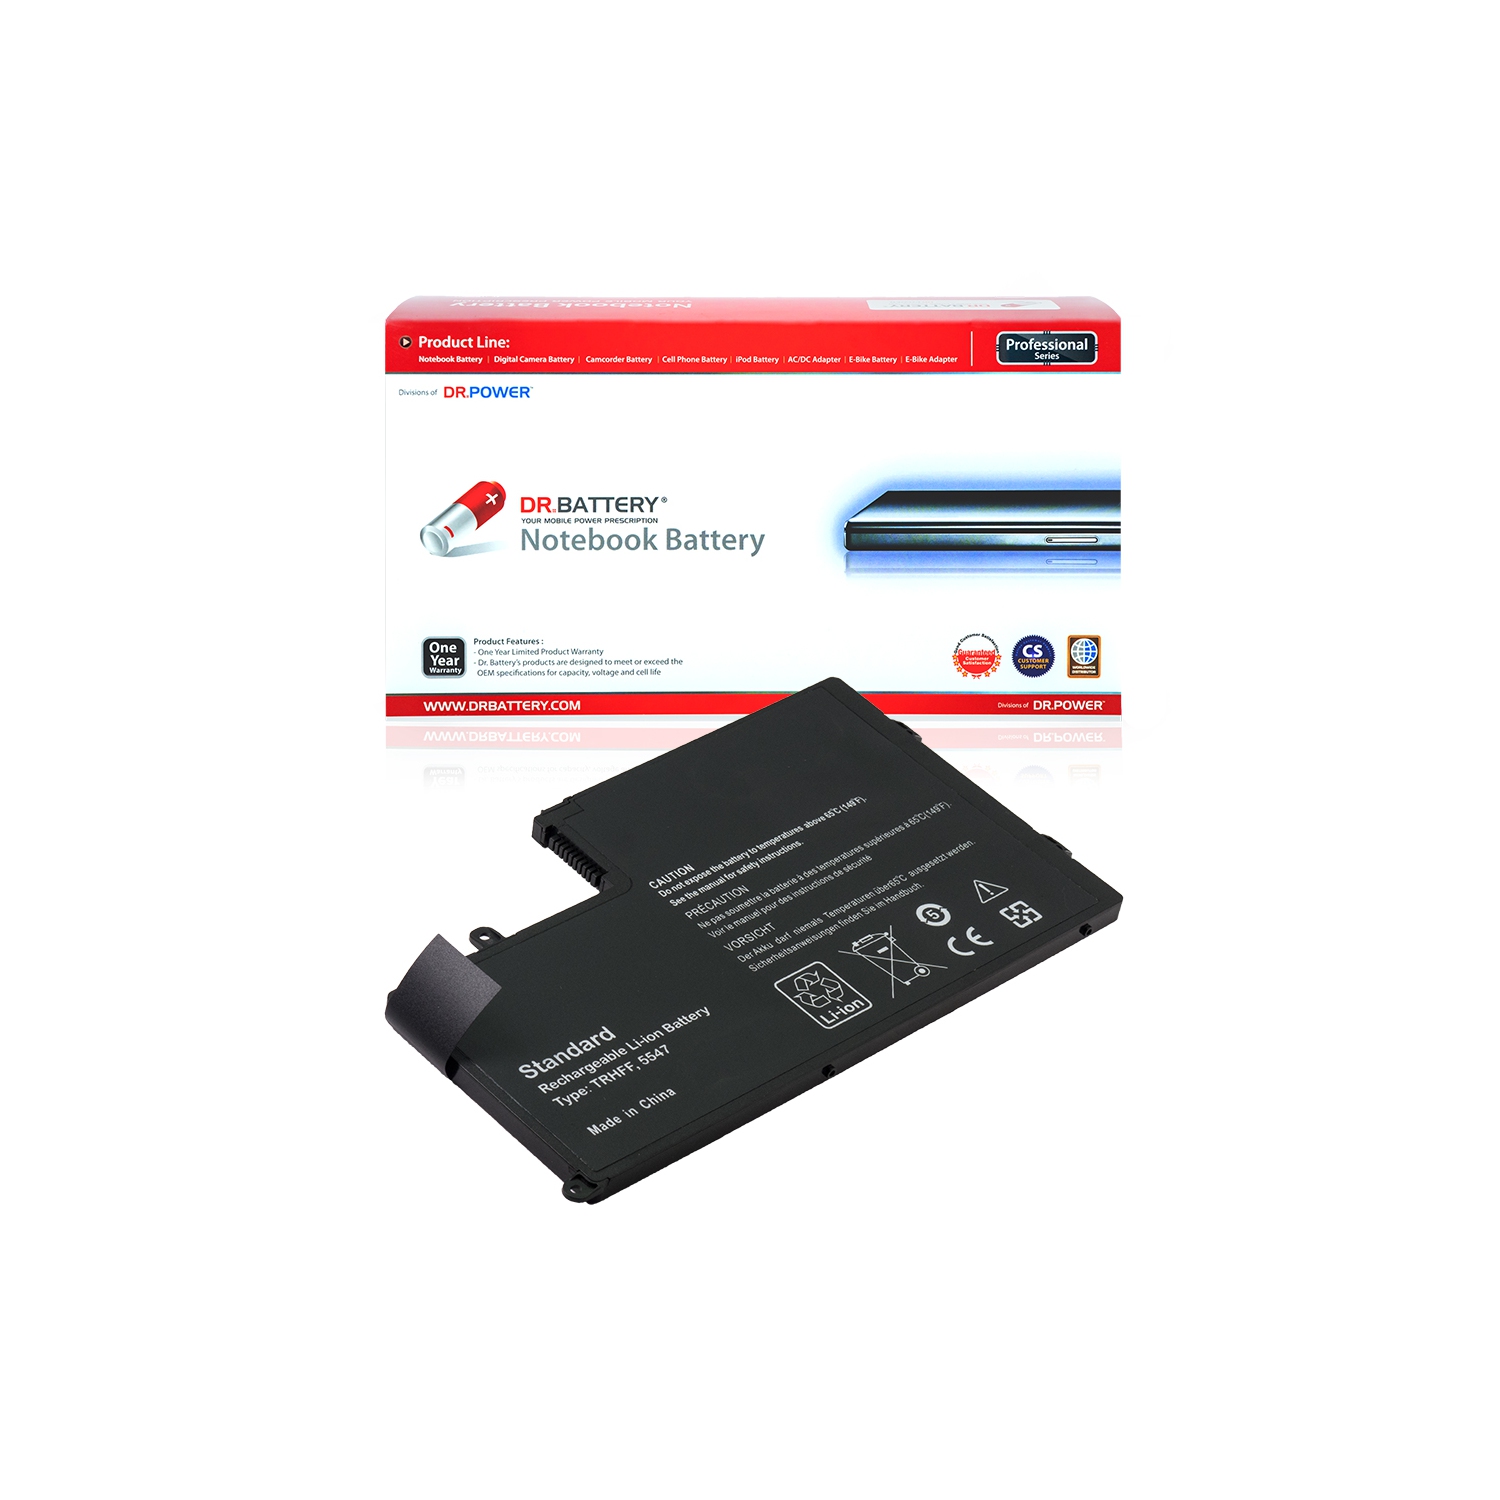 DR. BATTERY - Replacement for Dell Inspiron 15 (5542) / 15 (5547) / 15 (5548) / 15 5545 / 15 5547 / 01V2F6 / 0PD19 / 1JD62